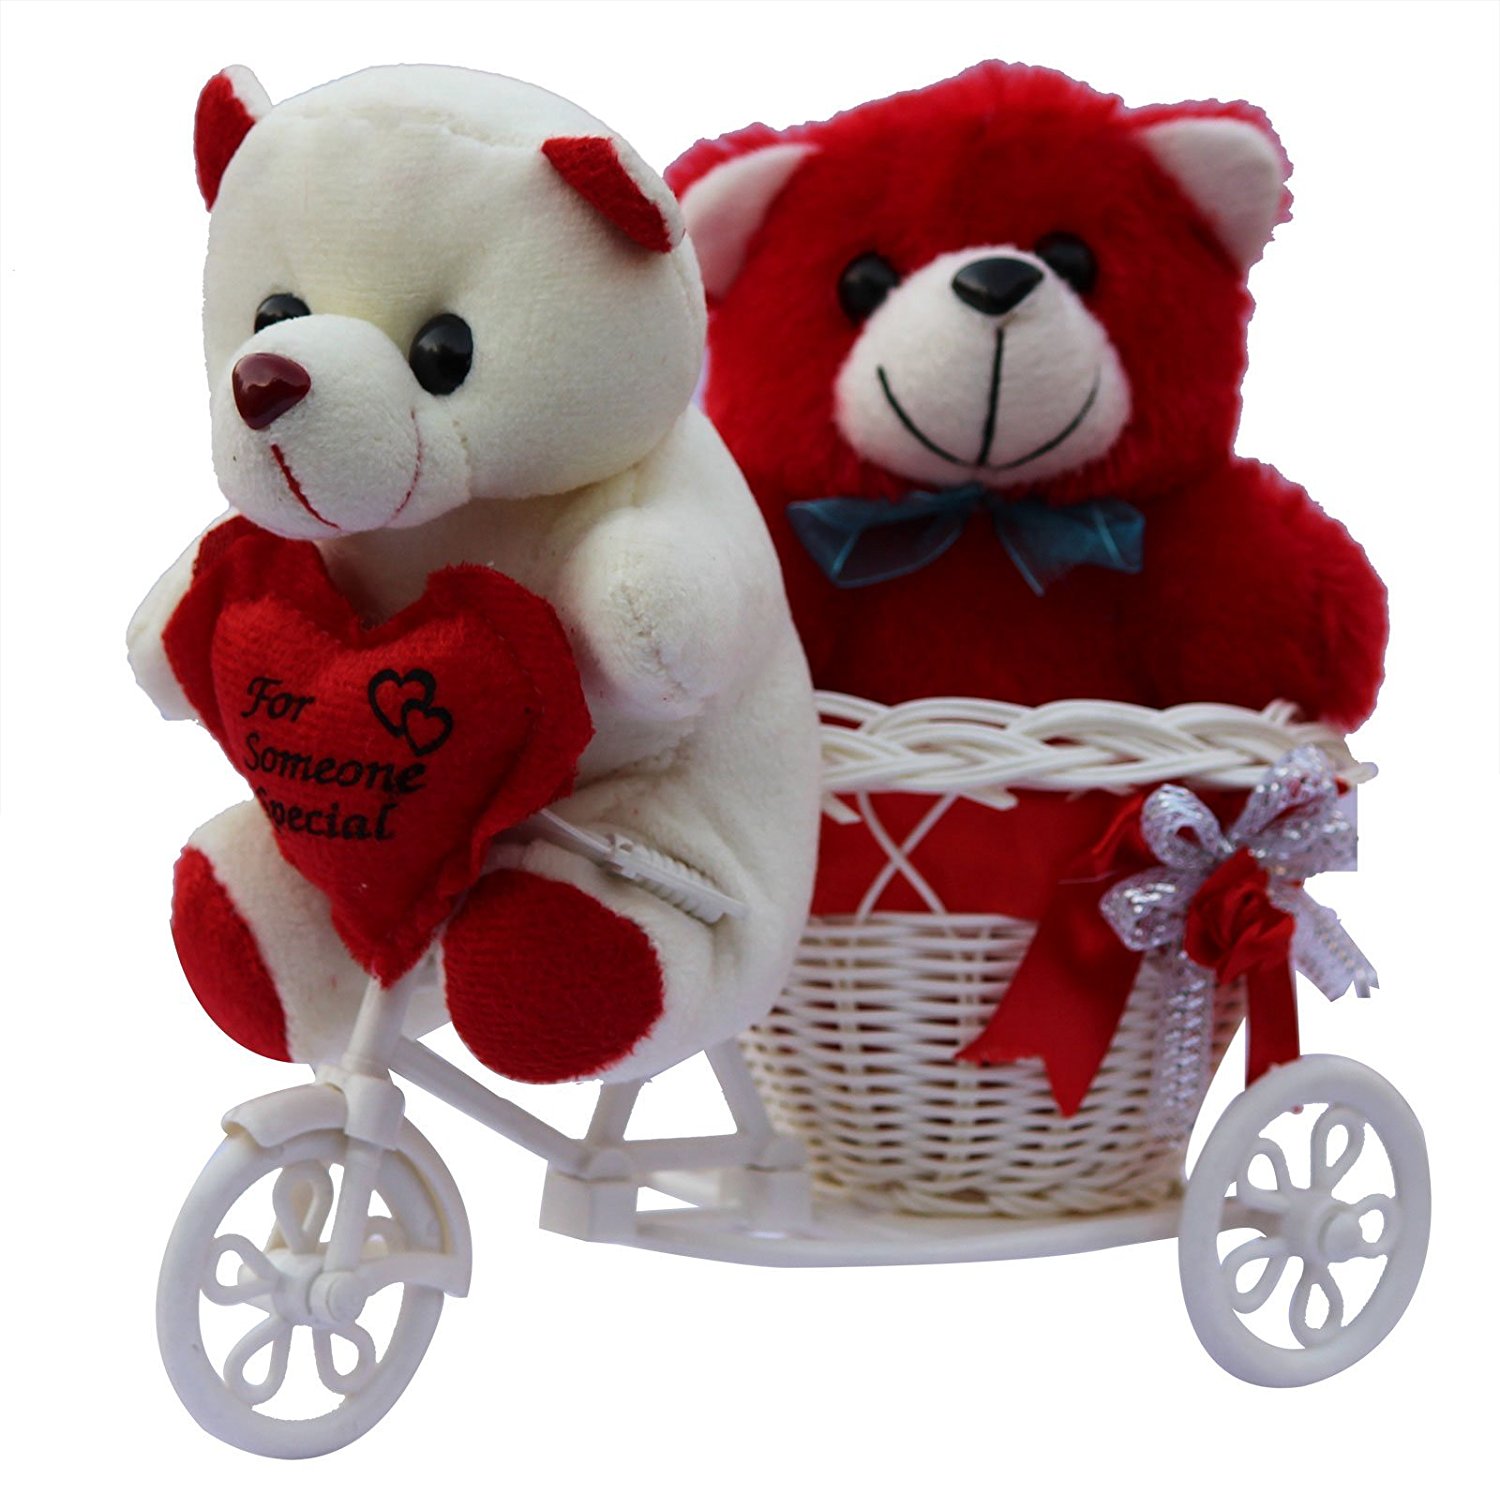 Buy Anishoptm Two Cute Teddy With A Tricycle Gift Set. Online at Low ...